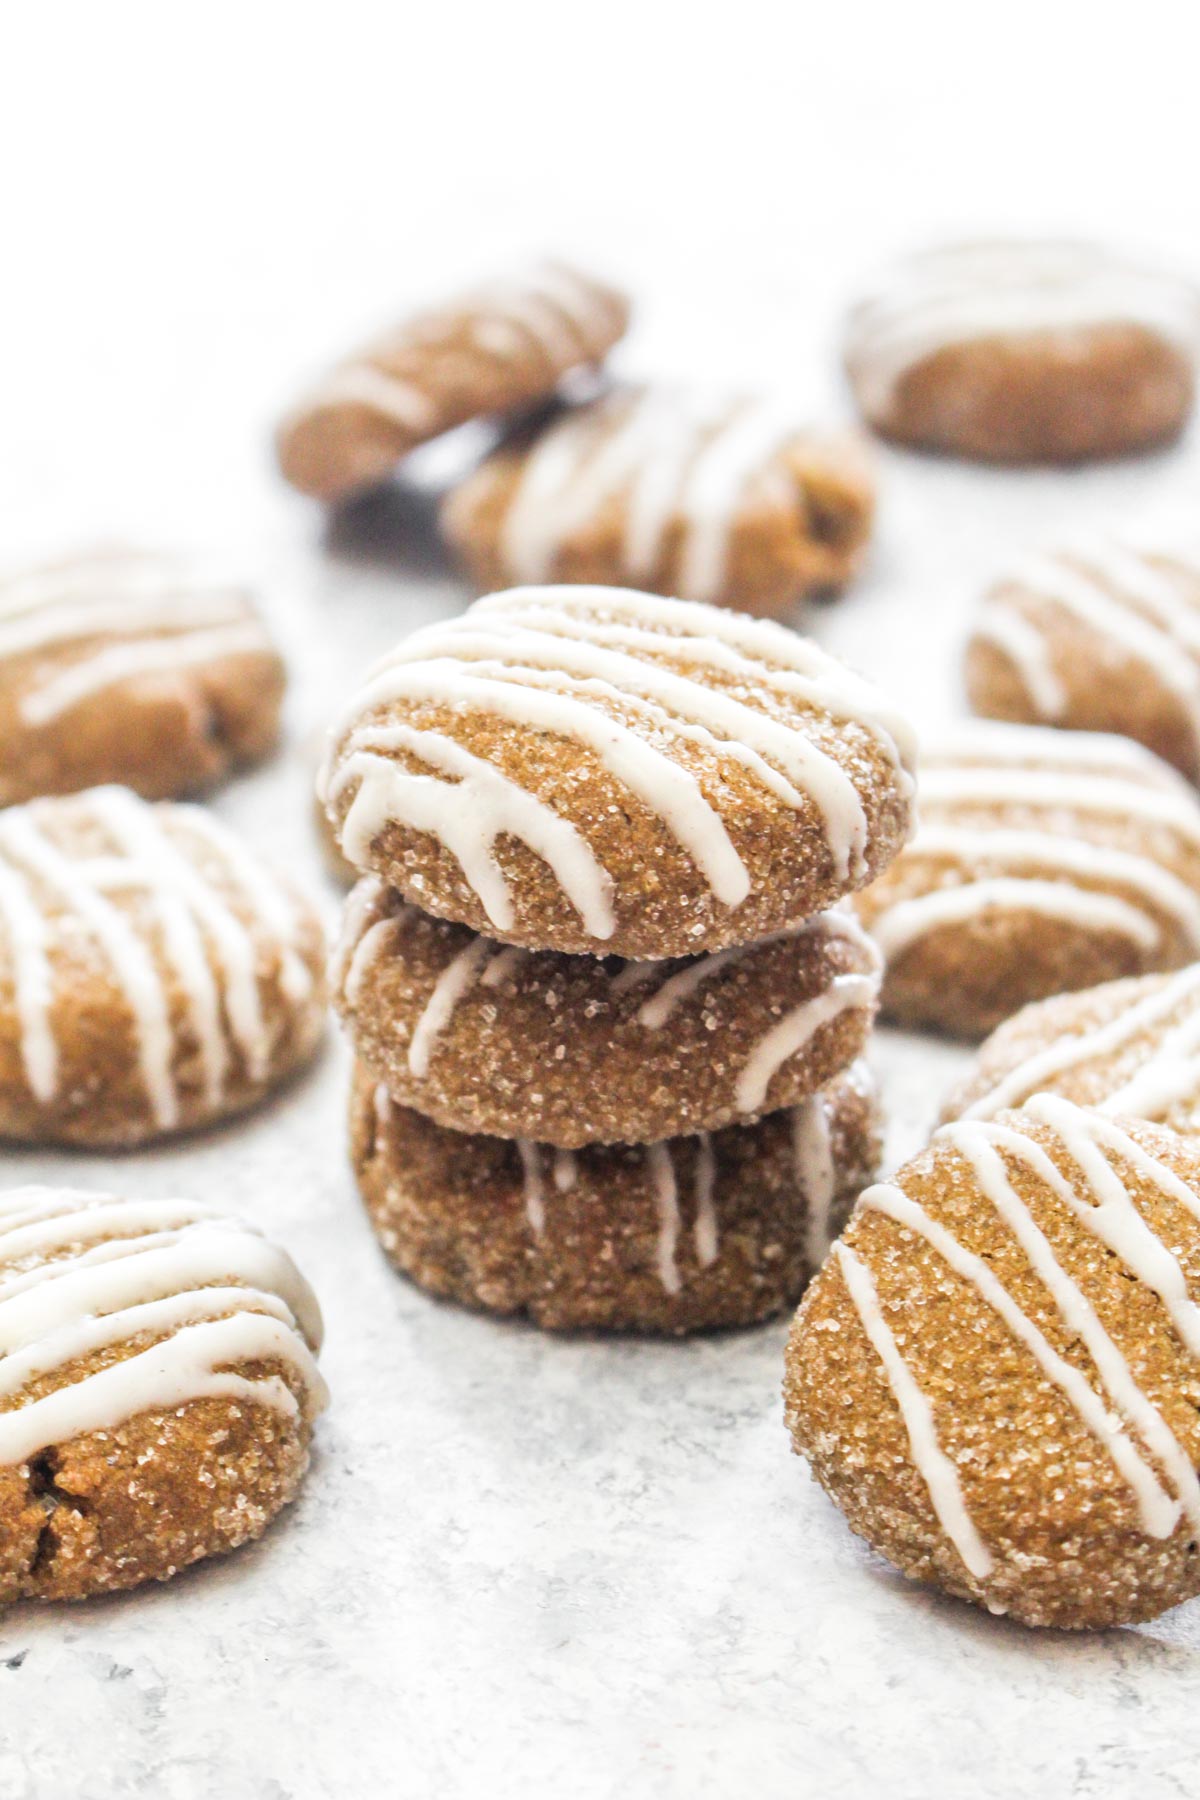 These Soft Ginger Cookies with Eggnog Glaze are a gluten free and vegan holiday dessert that everyone can enjoy! The soft spiced cookie gets topped with a sweet and creamy glaze. A secret ingredient keeps these cookies soft! | CatchingSeeds.com